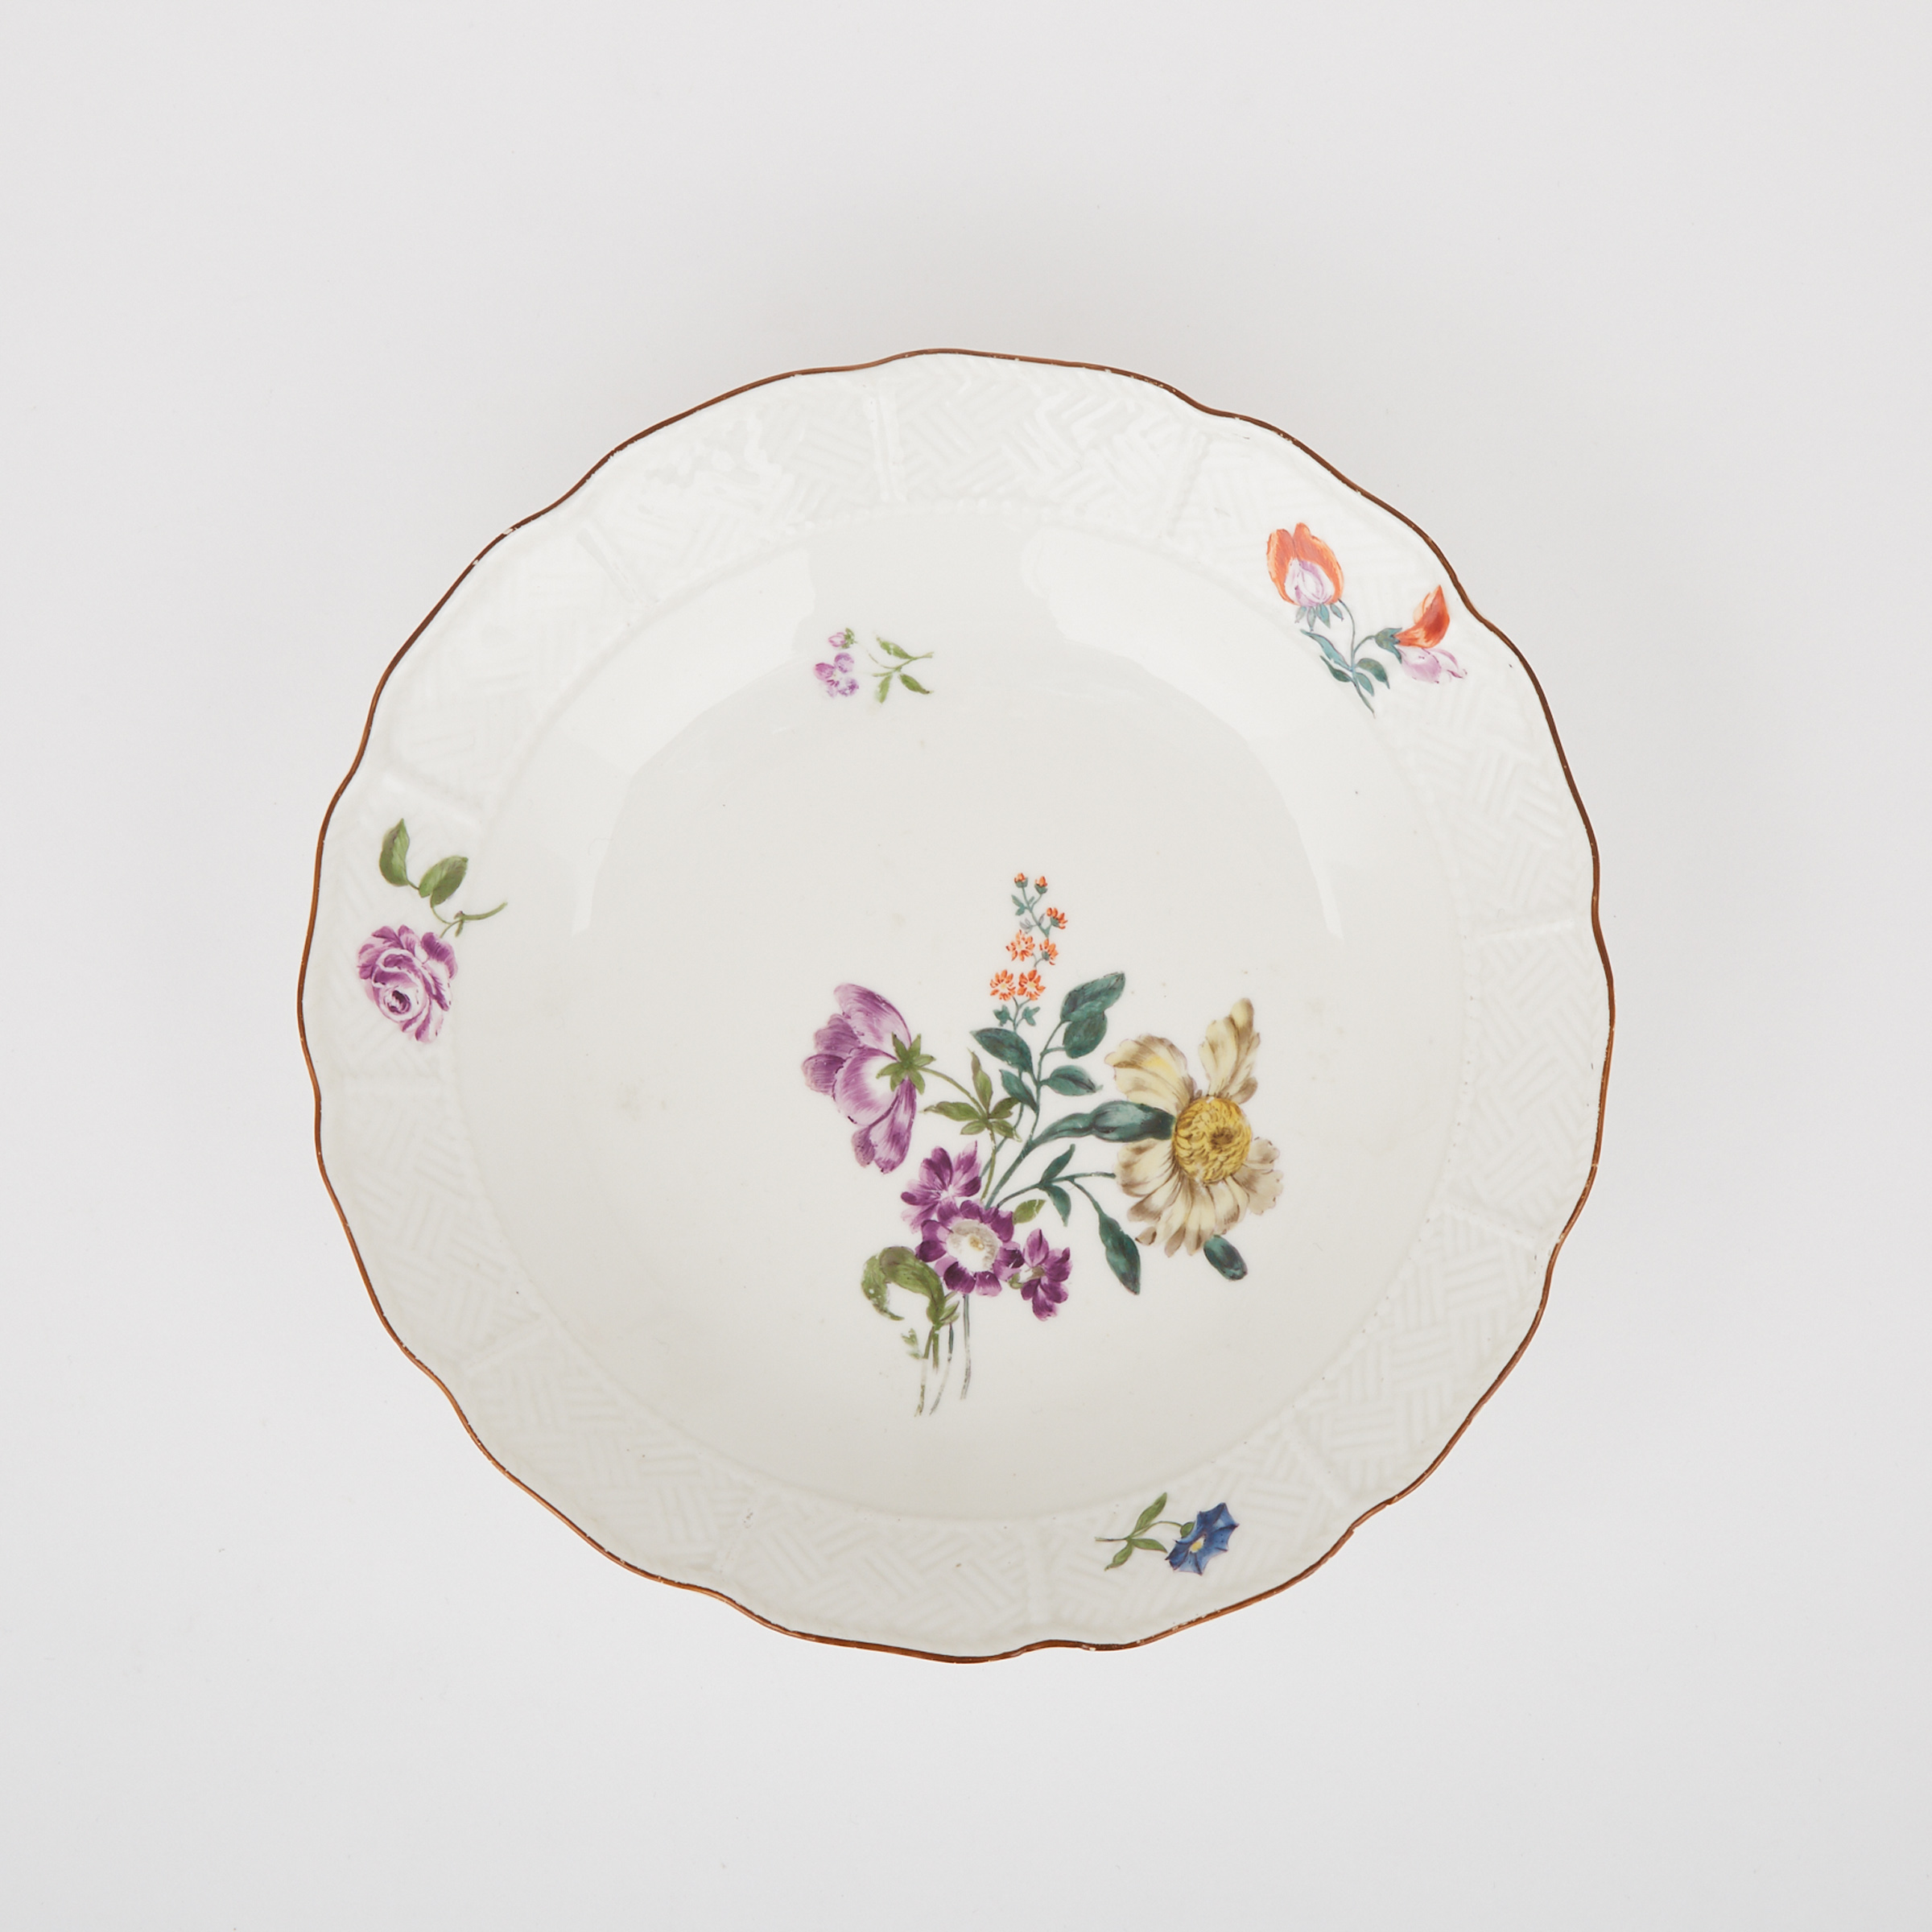 Meissen Moulded and Flower Painted Circular Dish, 18th century